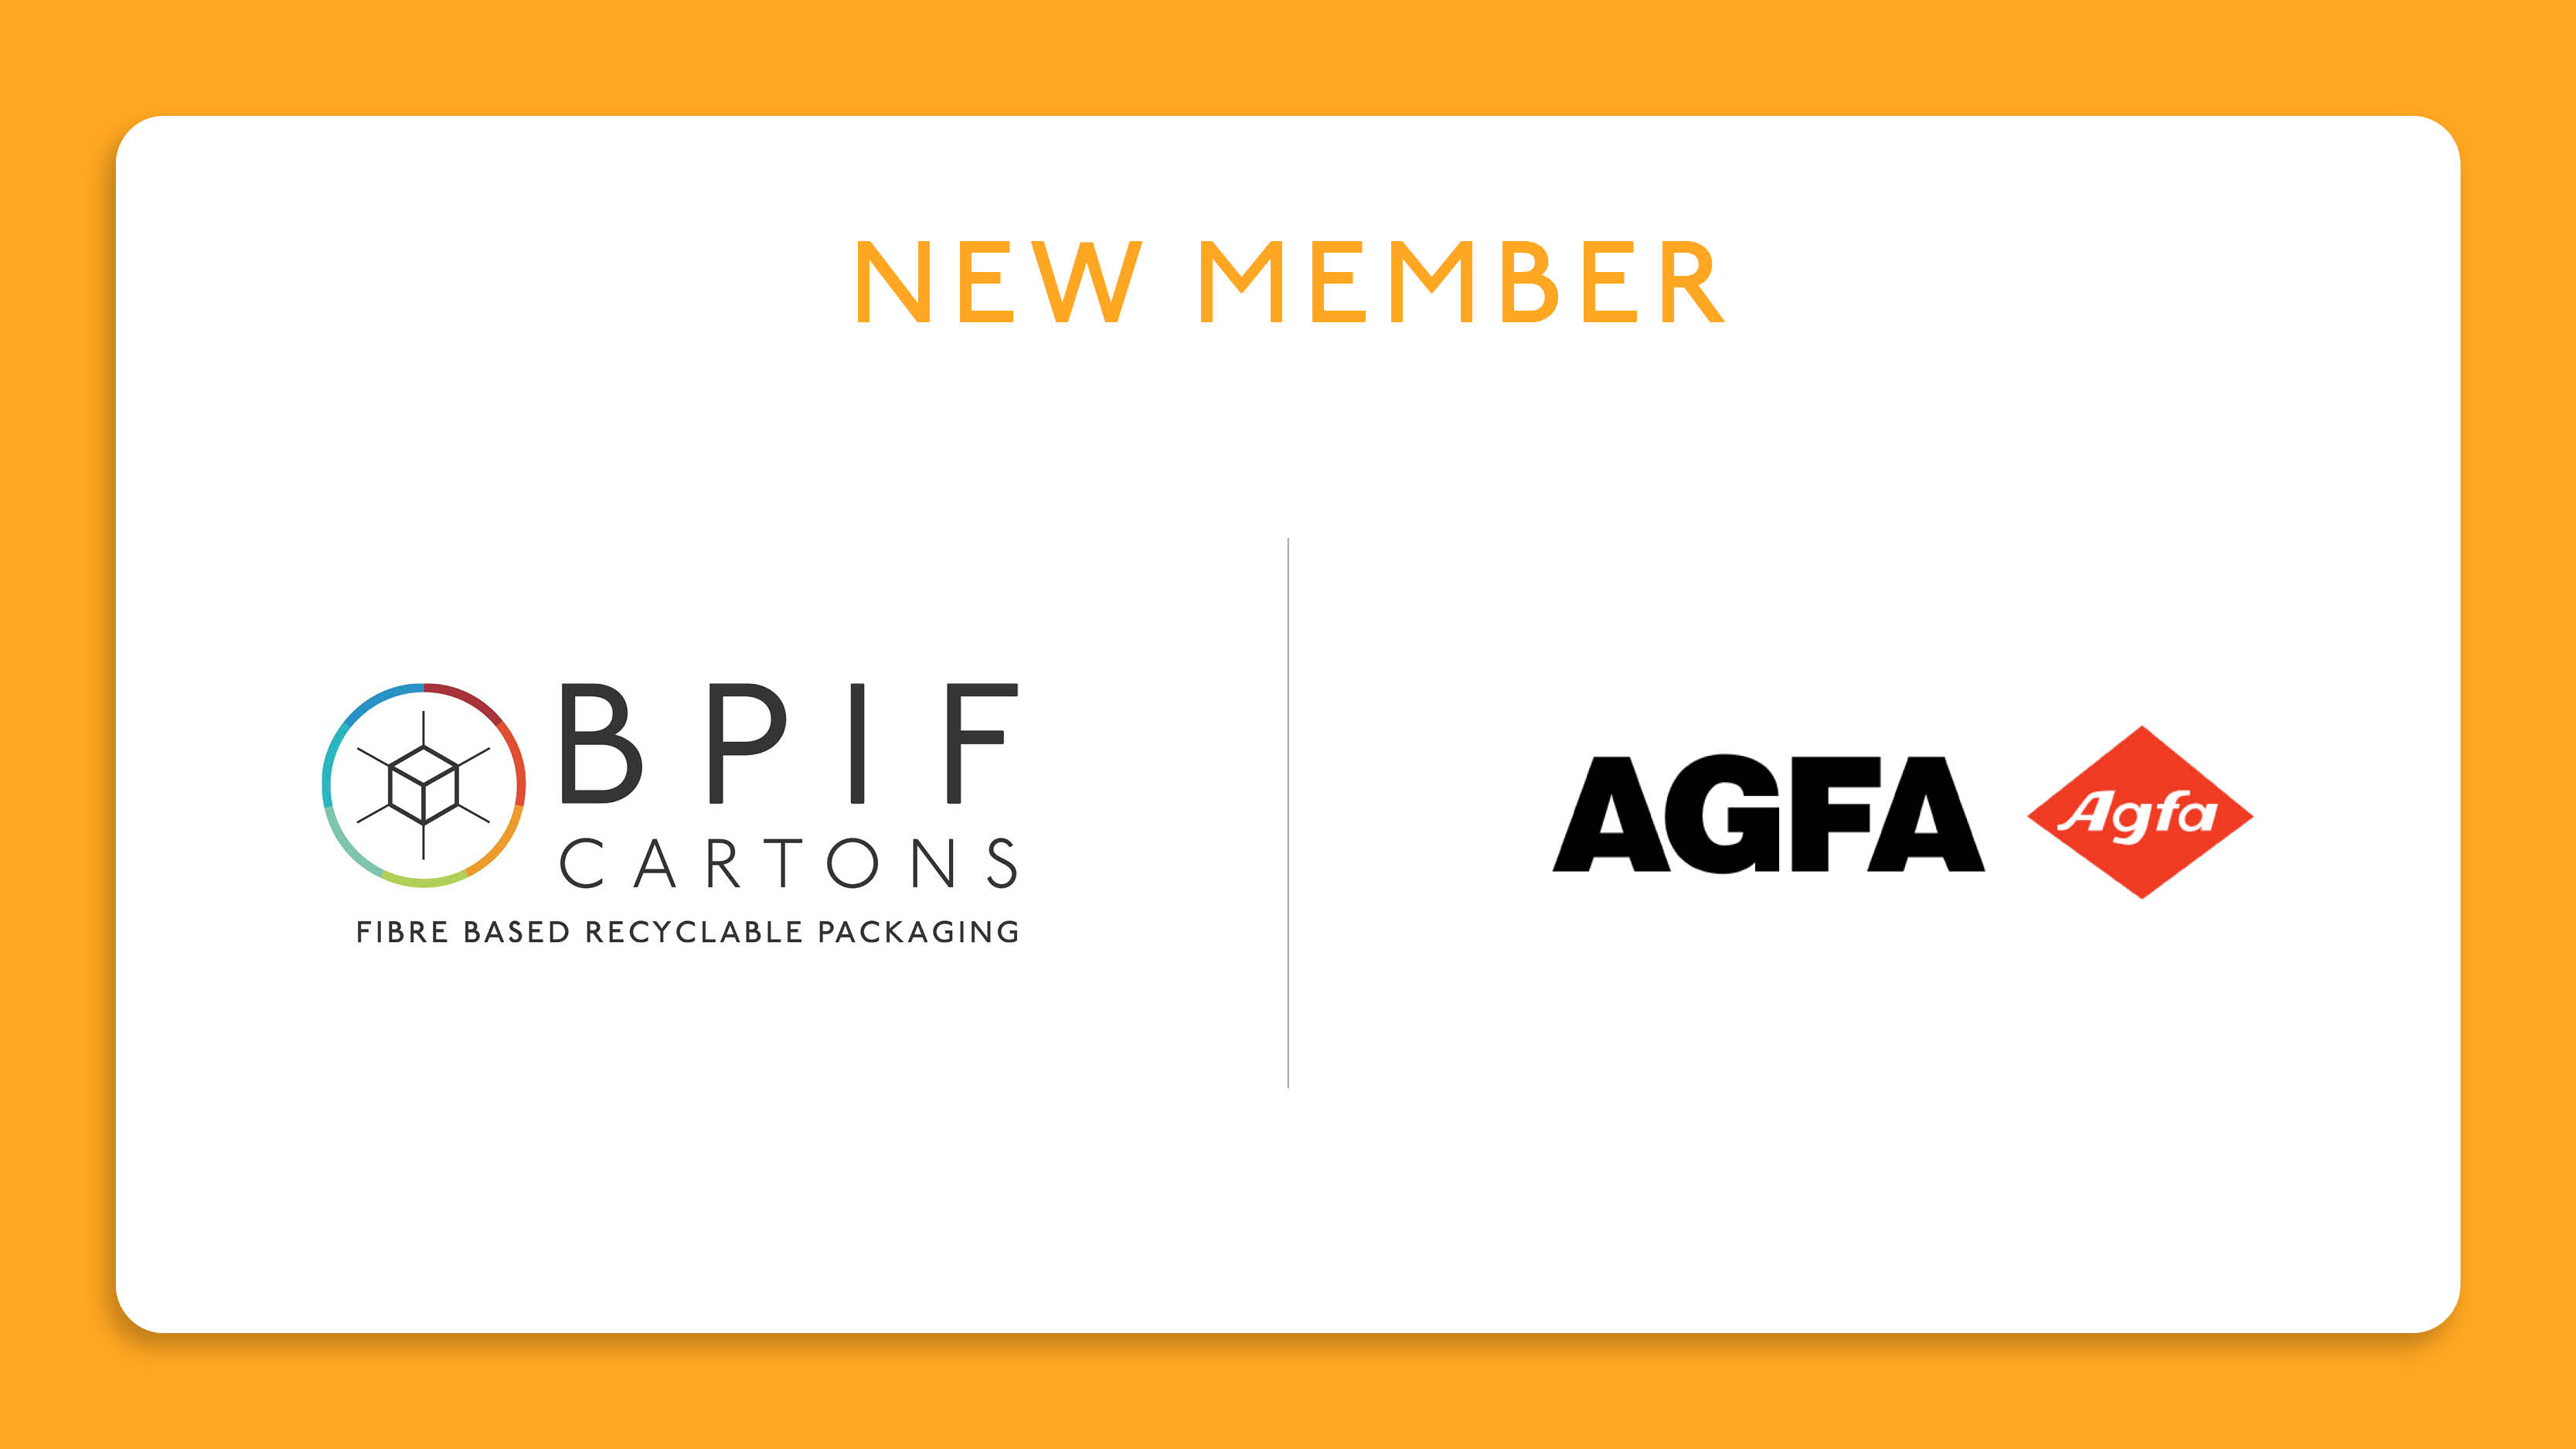 New Member - Agfa Injet Solutions